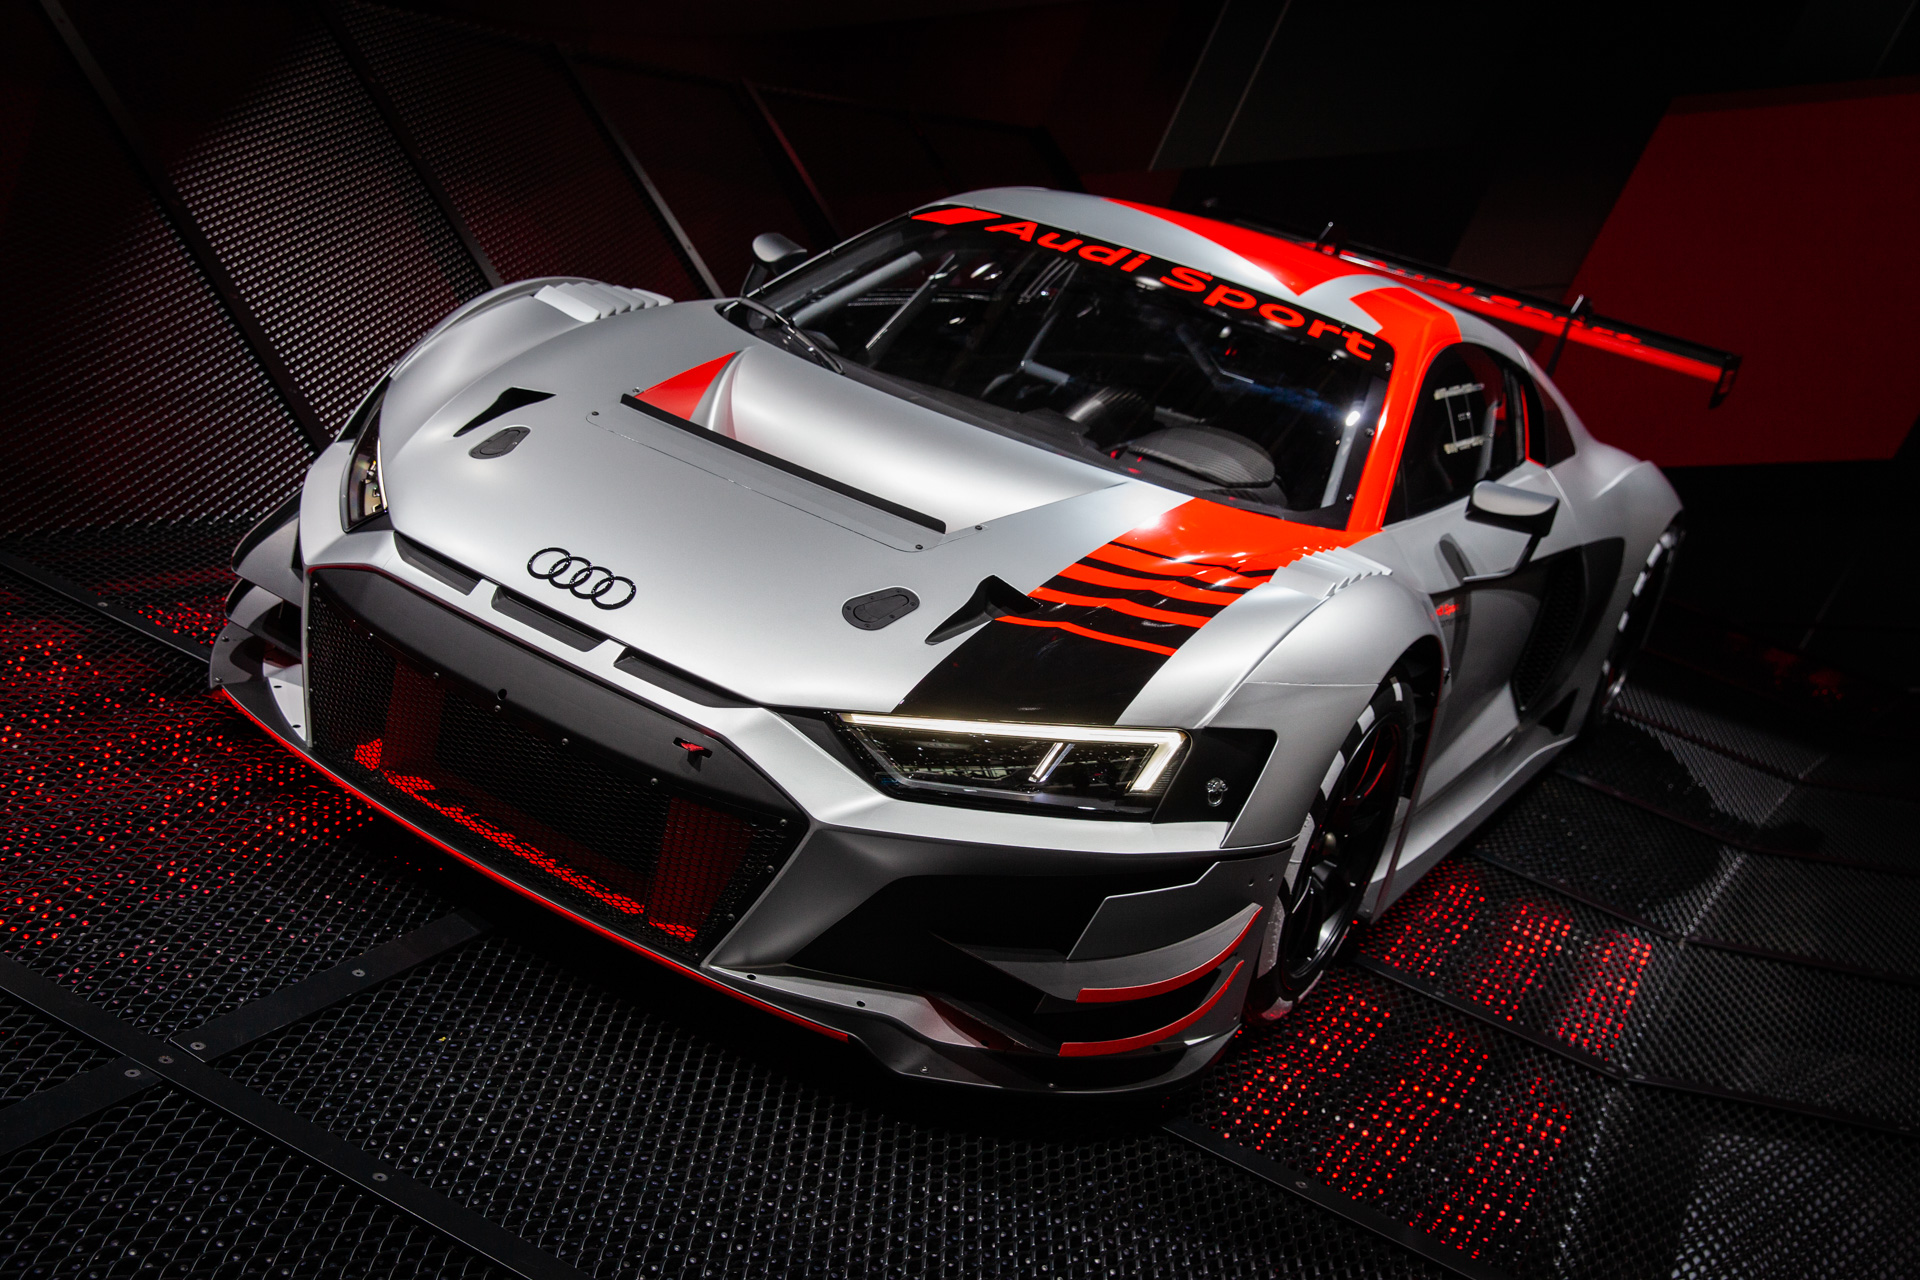 Updates to Audi R8 previewed by 2019 LMS race car